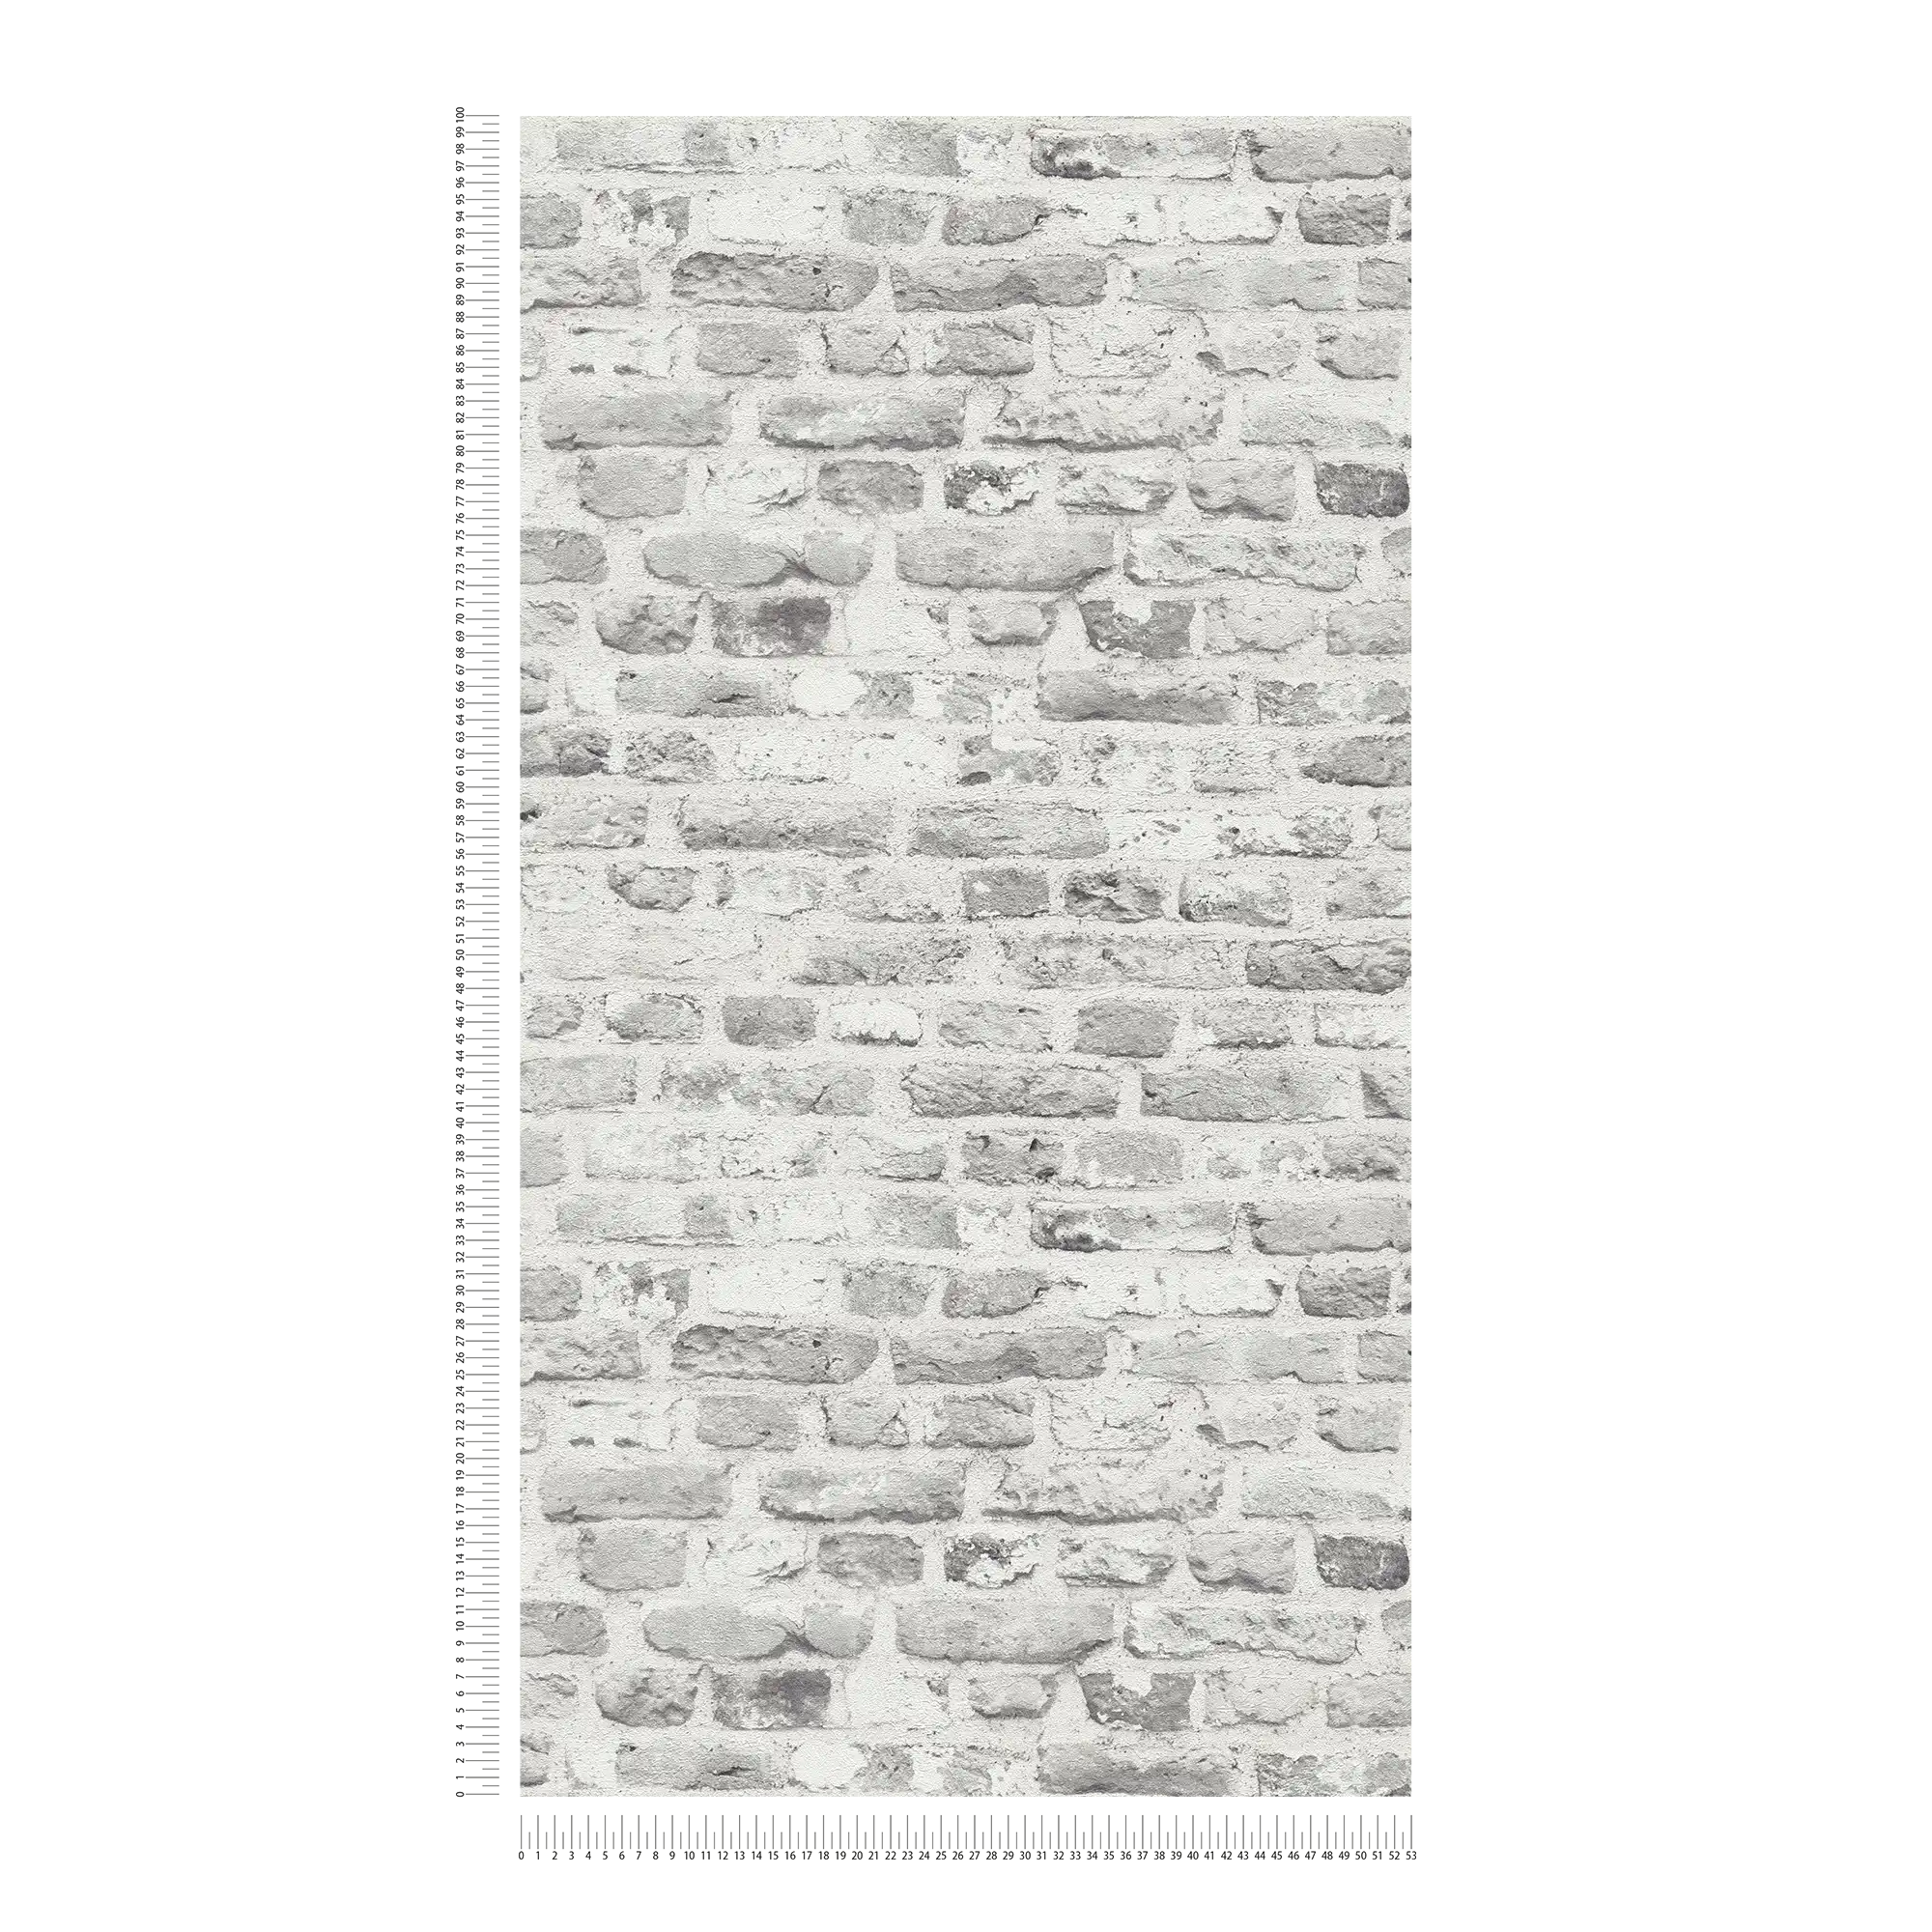             Stone look wallpaper with 3D brickwork - grey, white
        